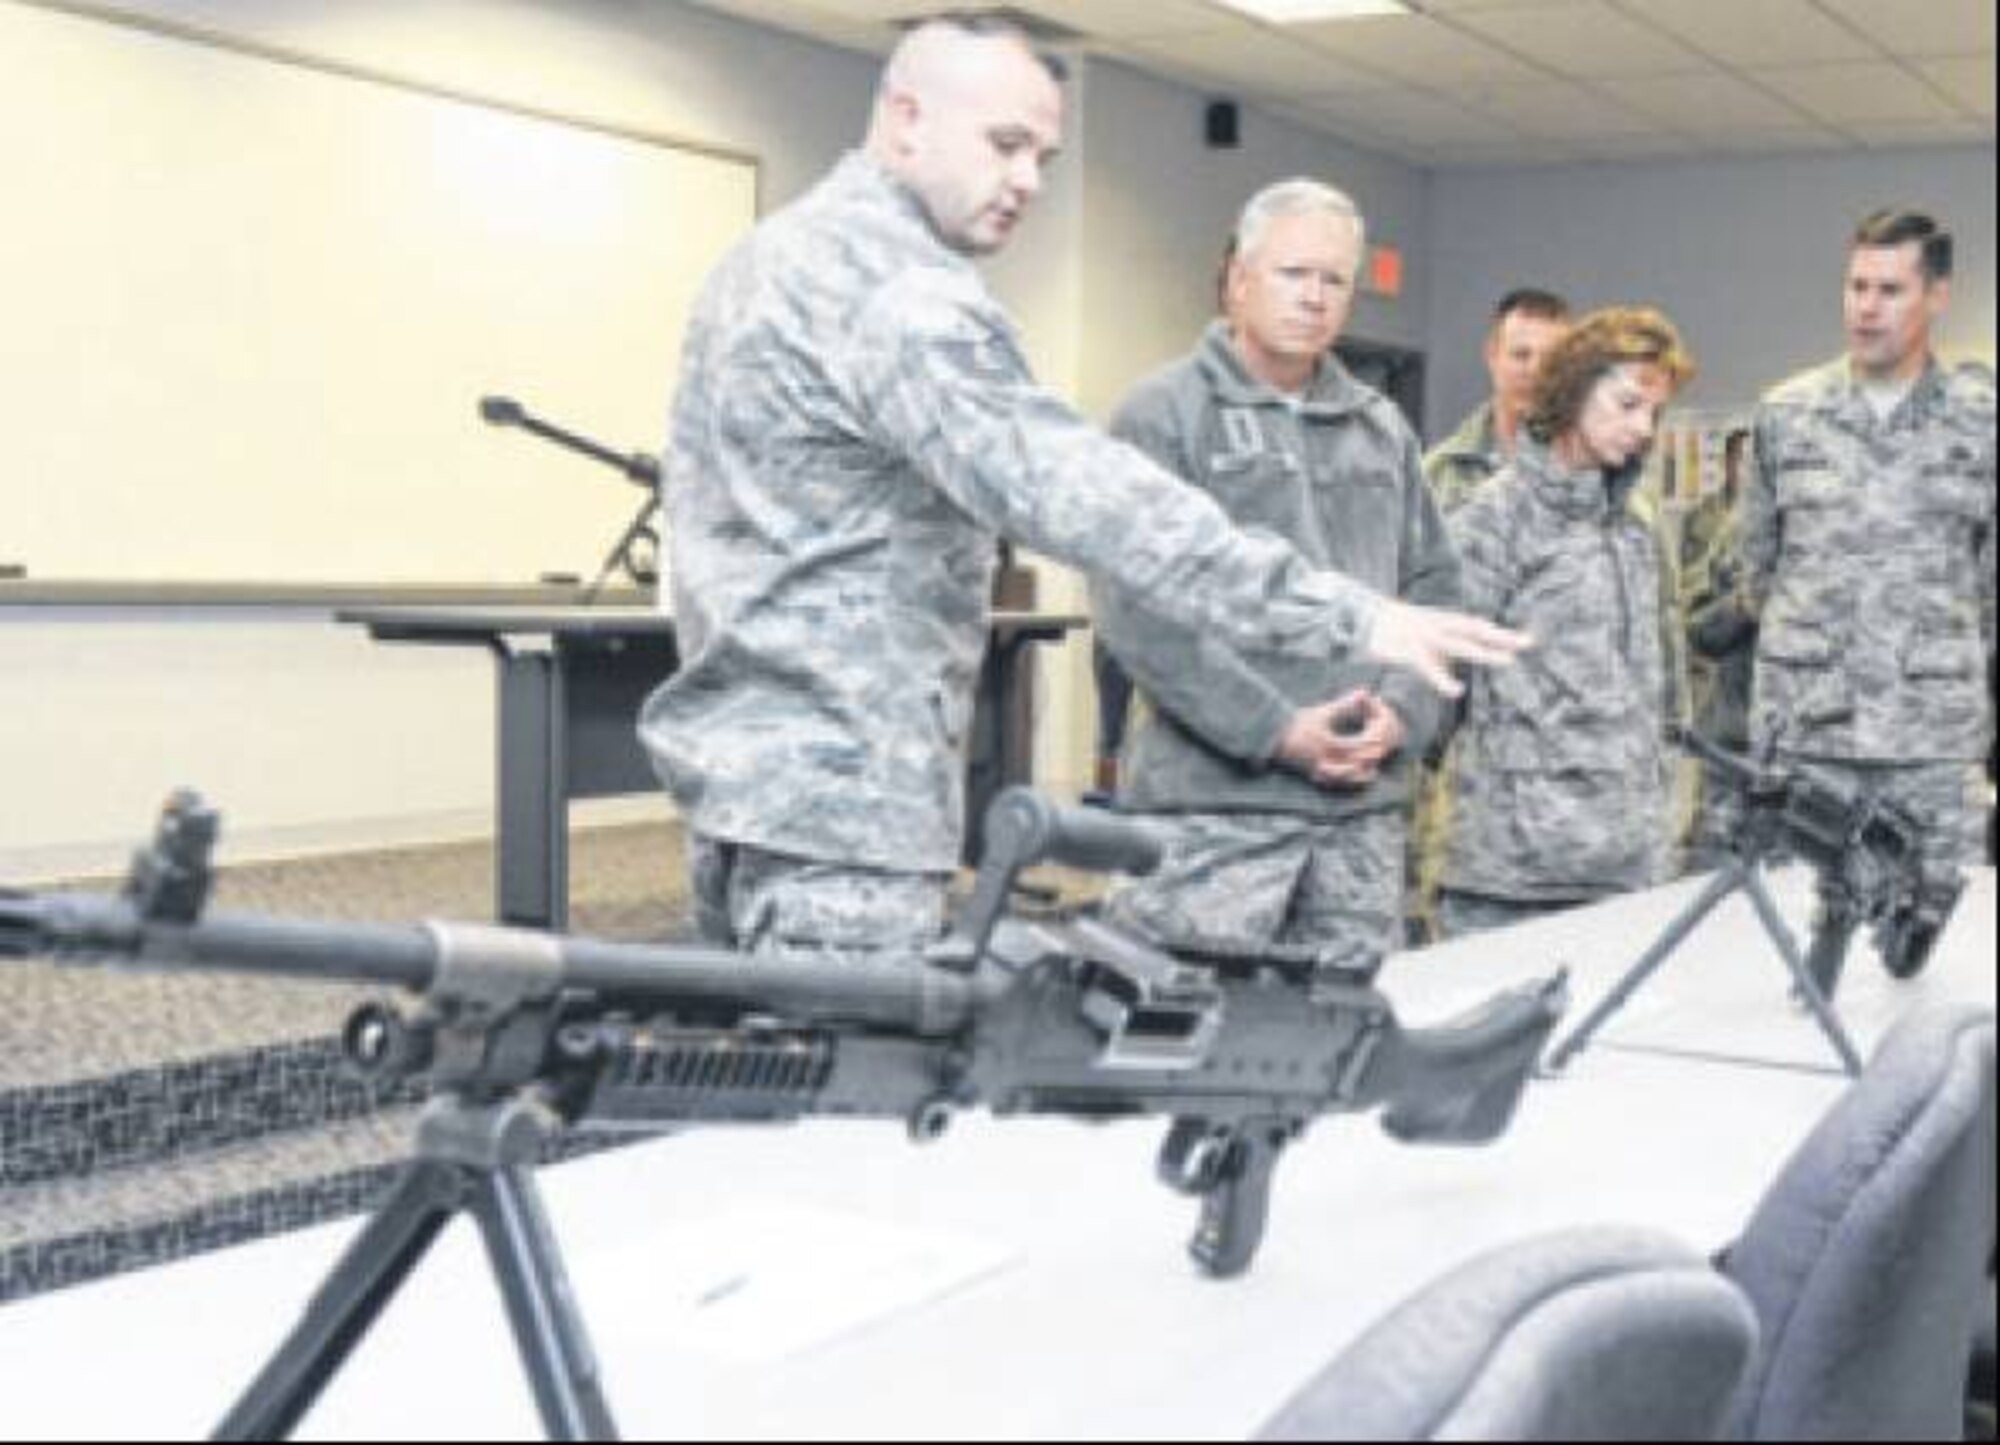 Tech. Sgt Sean Bowes, 88th Security Forces Squadron Combat Army Training and Maintainance (CATM) non-commissioned officer in charge, shows Lt. Gen. John Thompson, Air Force Life Cycle Management Center commander, some of the various weapons the base has access to during Thompson's tour of the 88th Air Base Wing on Nov. 13. Other stops included the Kittyhawk Pharmacy, 88th Operations Support Squadron, 88th Medical Group, the 88th Communications Group and the base recycling center. Looking on during the CATM stop are Chief Master Sgt. Doreen Losacco, AFLCMC commnad chief, Chief Master Sgt. Charles Hoffman, 88th ABW command chief, and Col. John Devillier, 88th ABW commander. (Air Force Photos by Wesley Farnsworth)